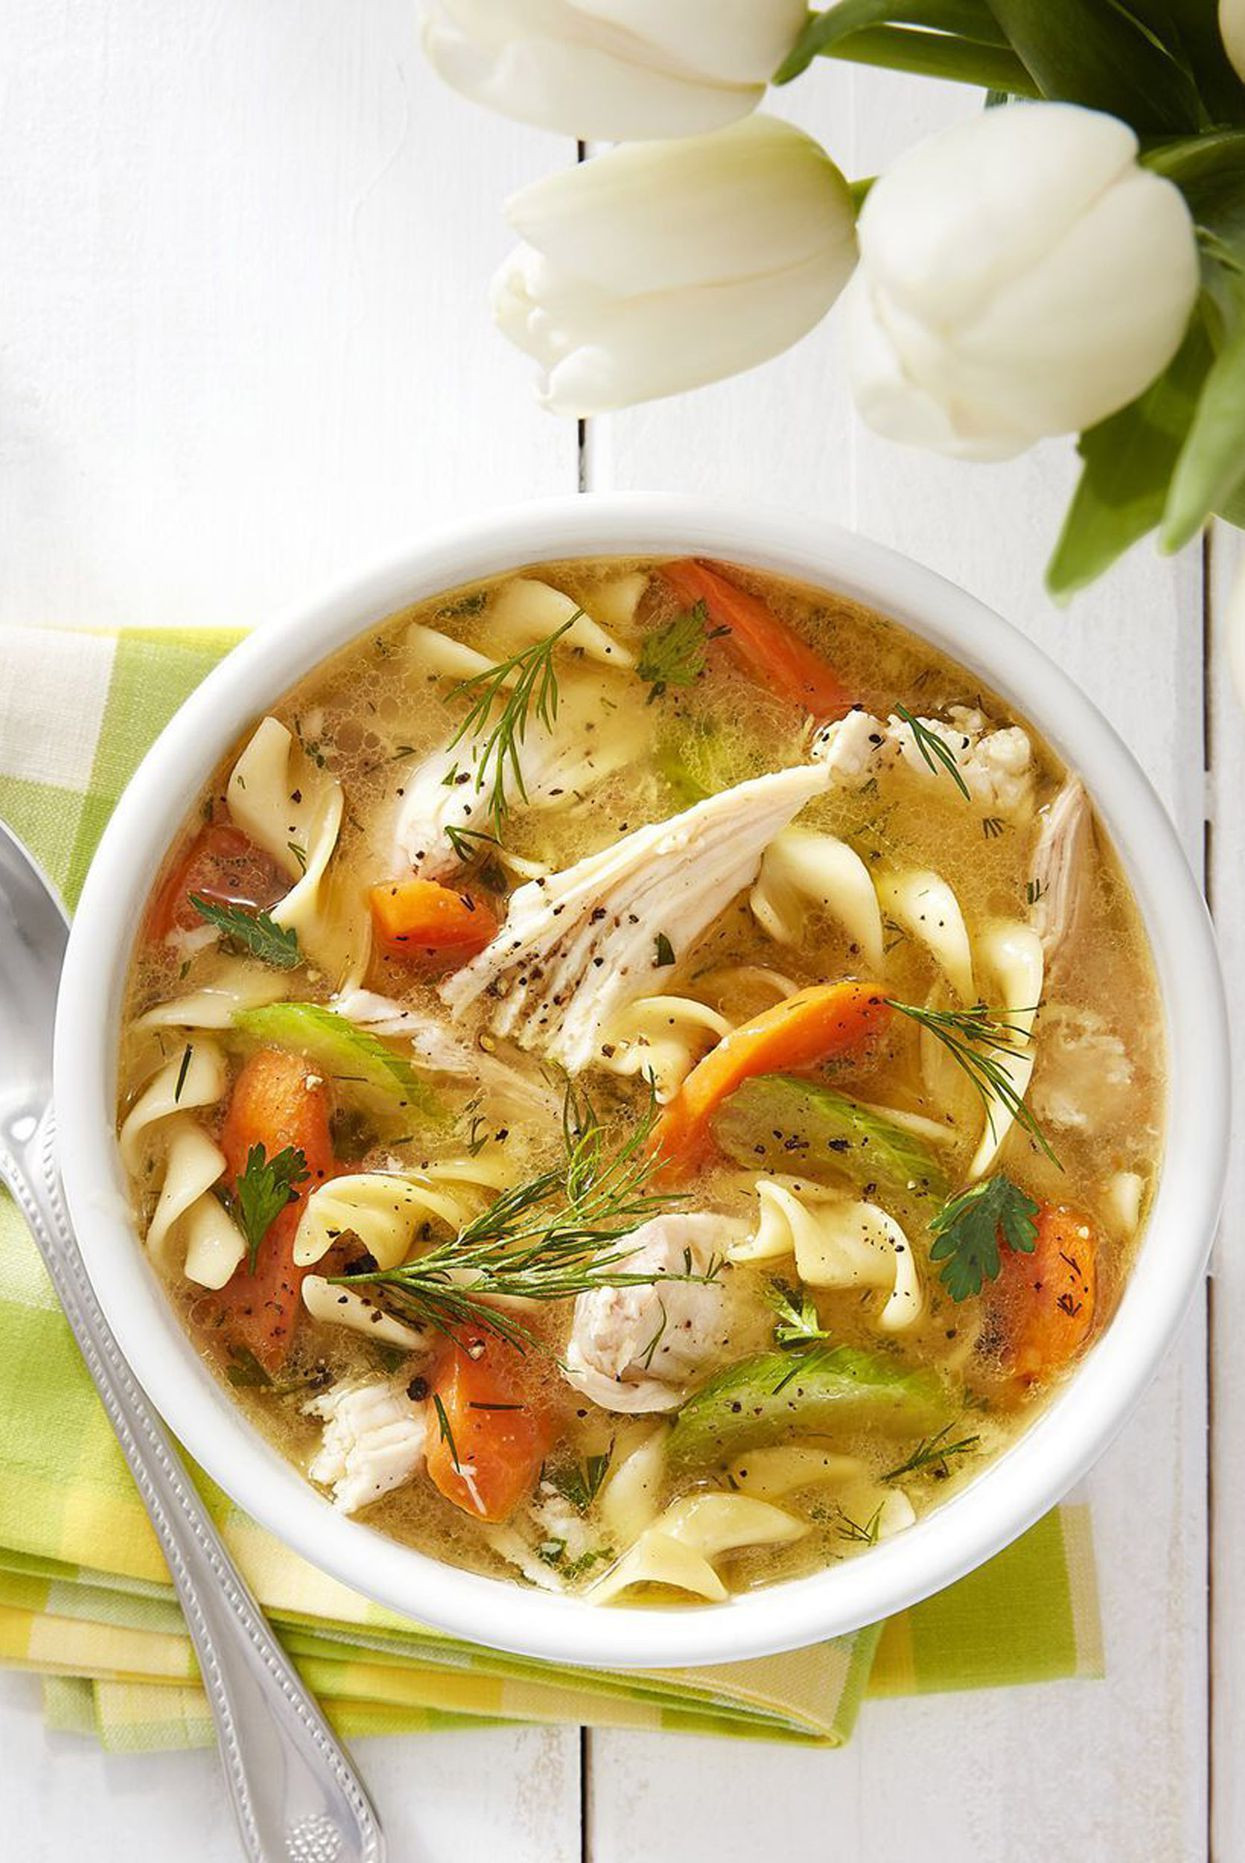 Healthy Soups To Make
 Healthy Soup Recipes to Make for Your Family This Fall